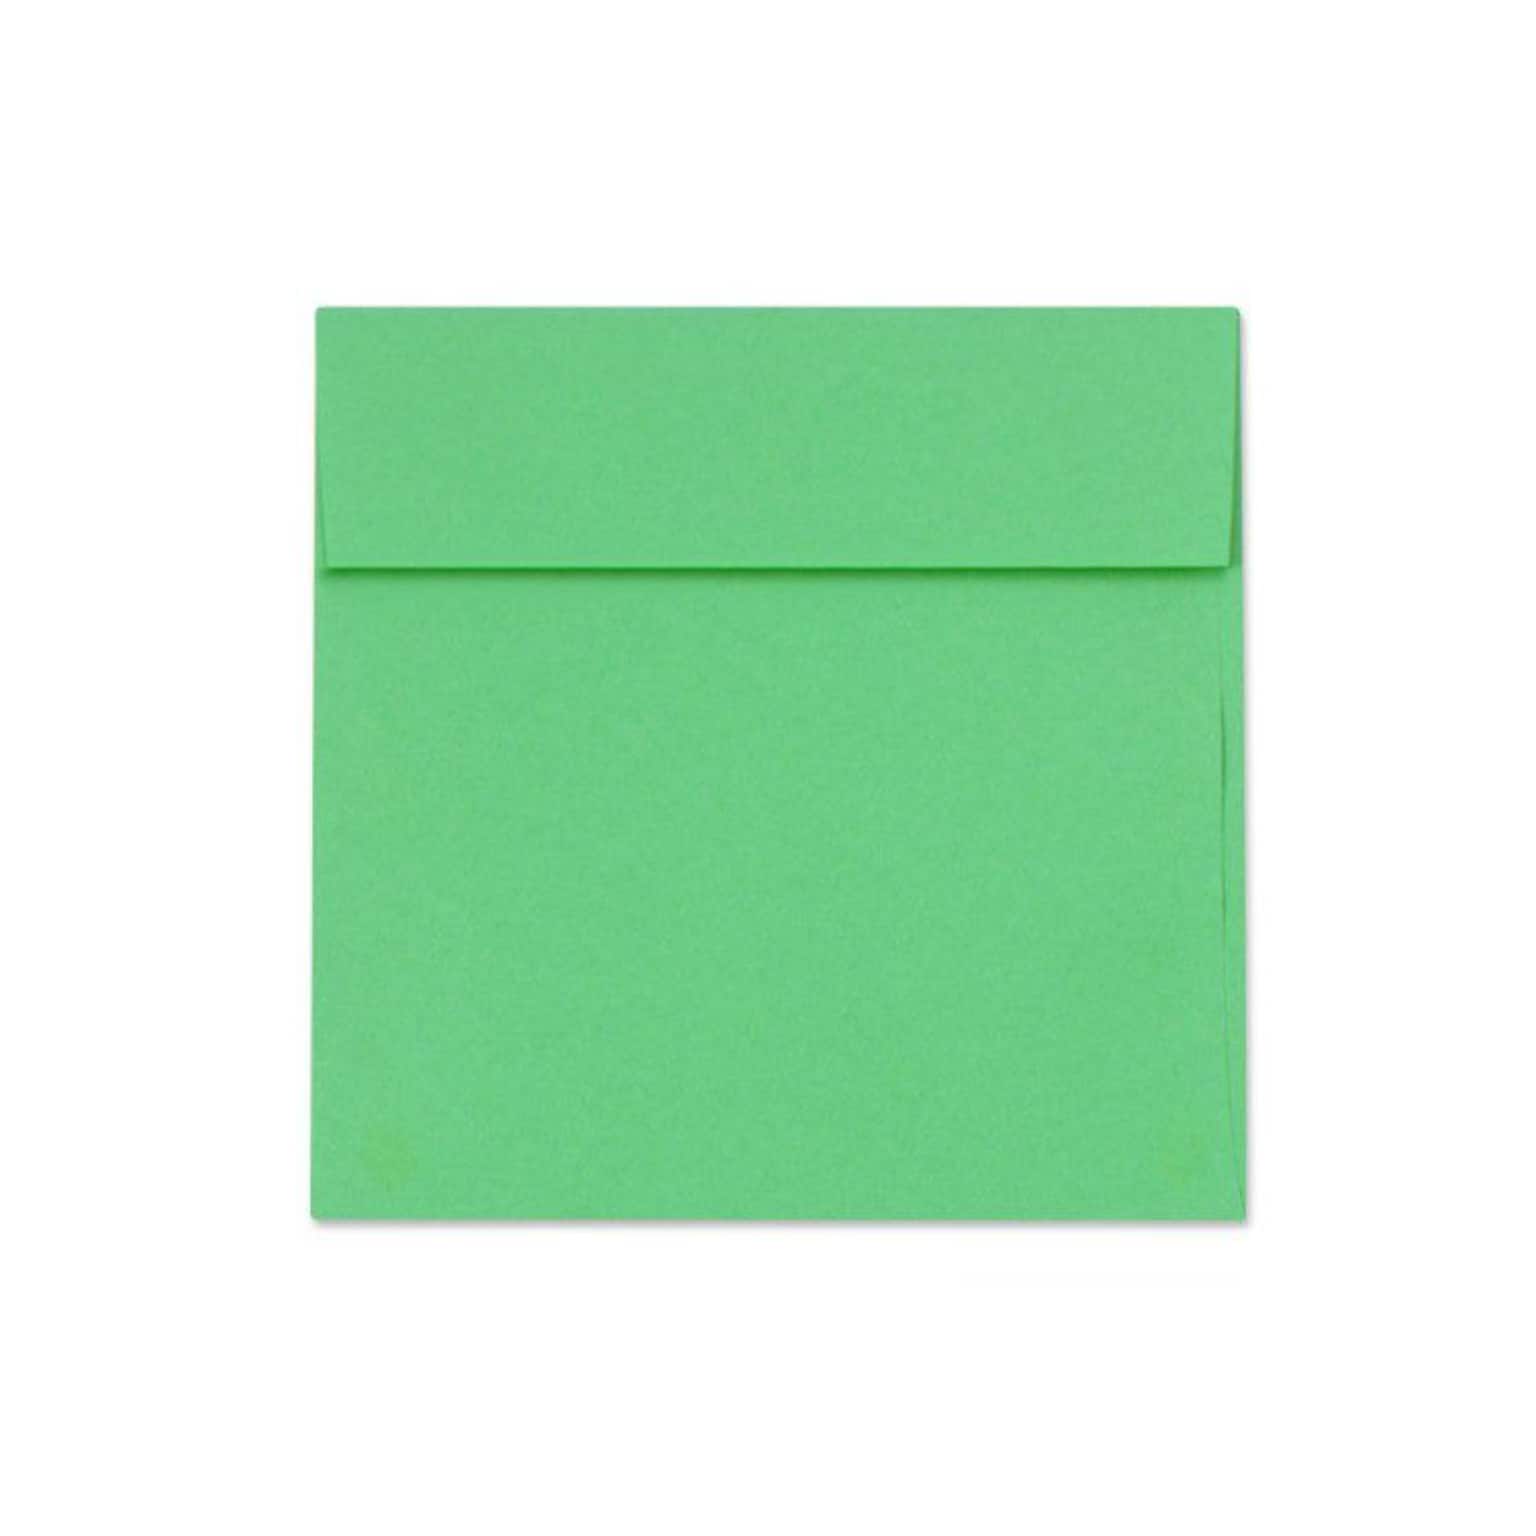 LUX 5 x 5 Square Envelopes, 50/Box, Holiday Green (8505-12-50)